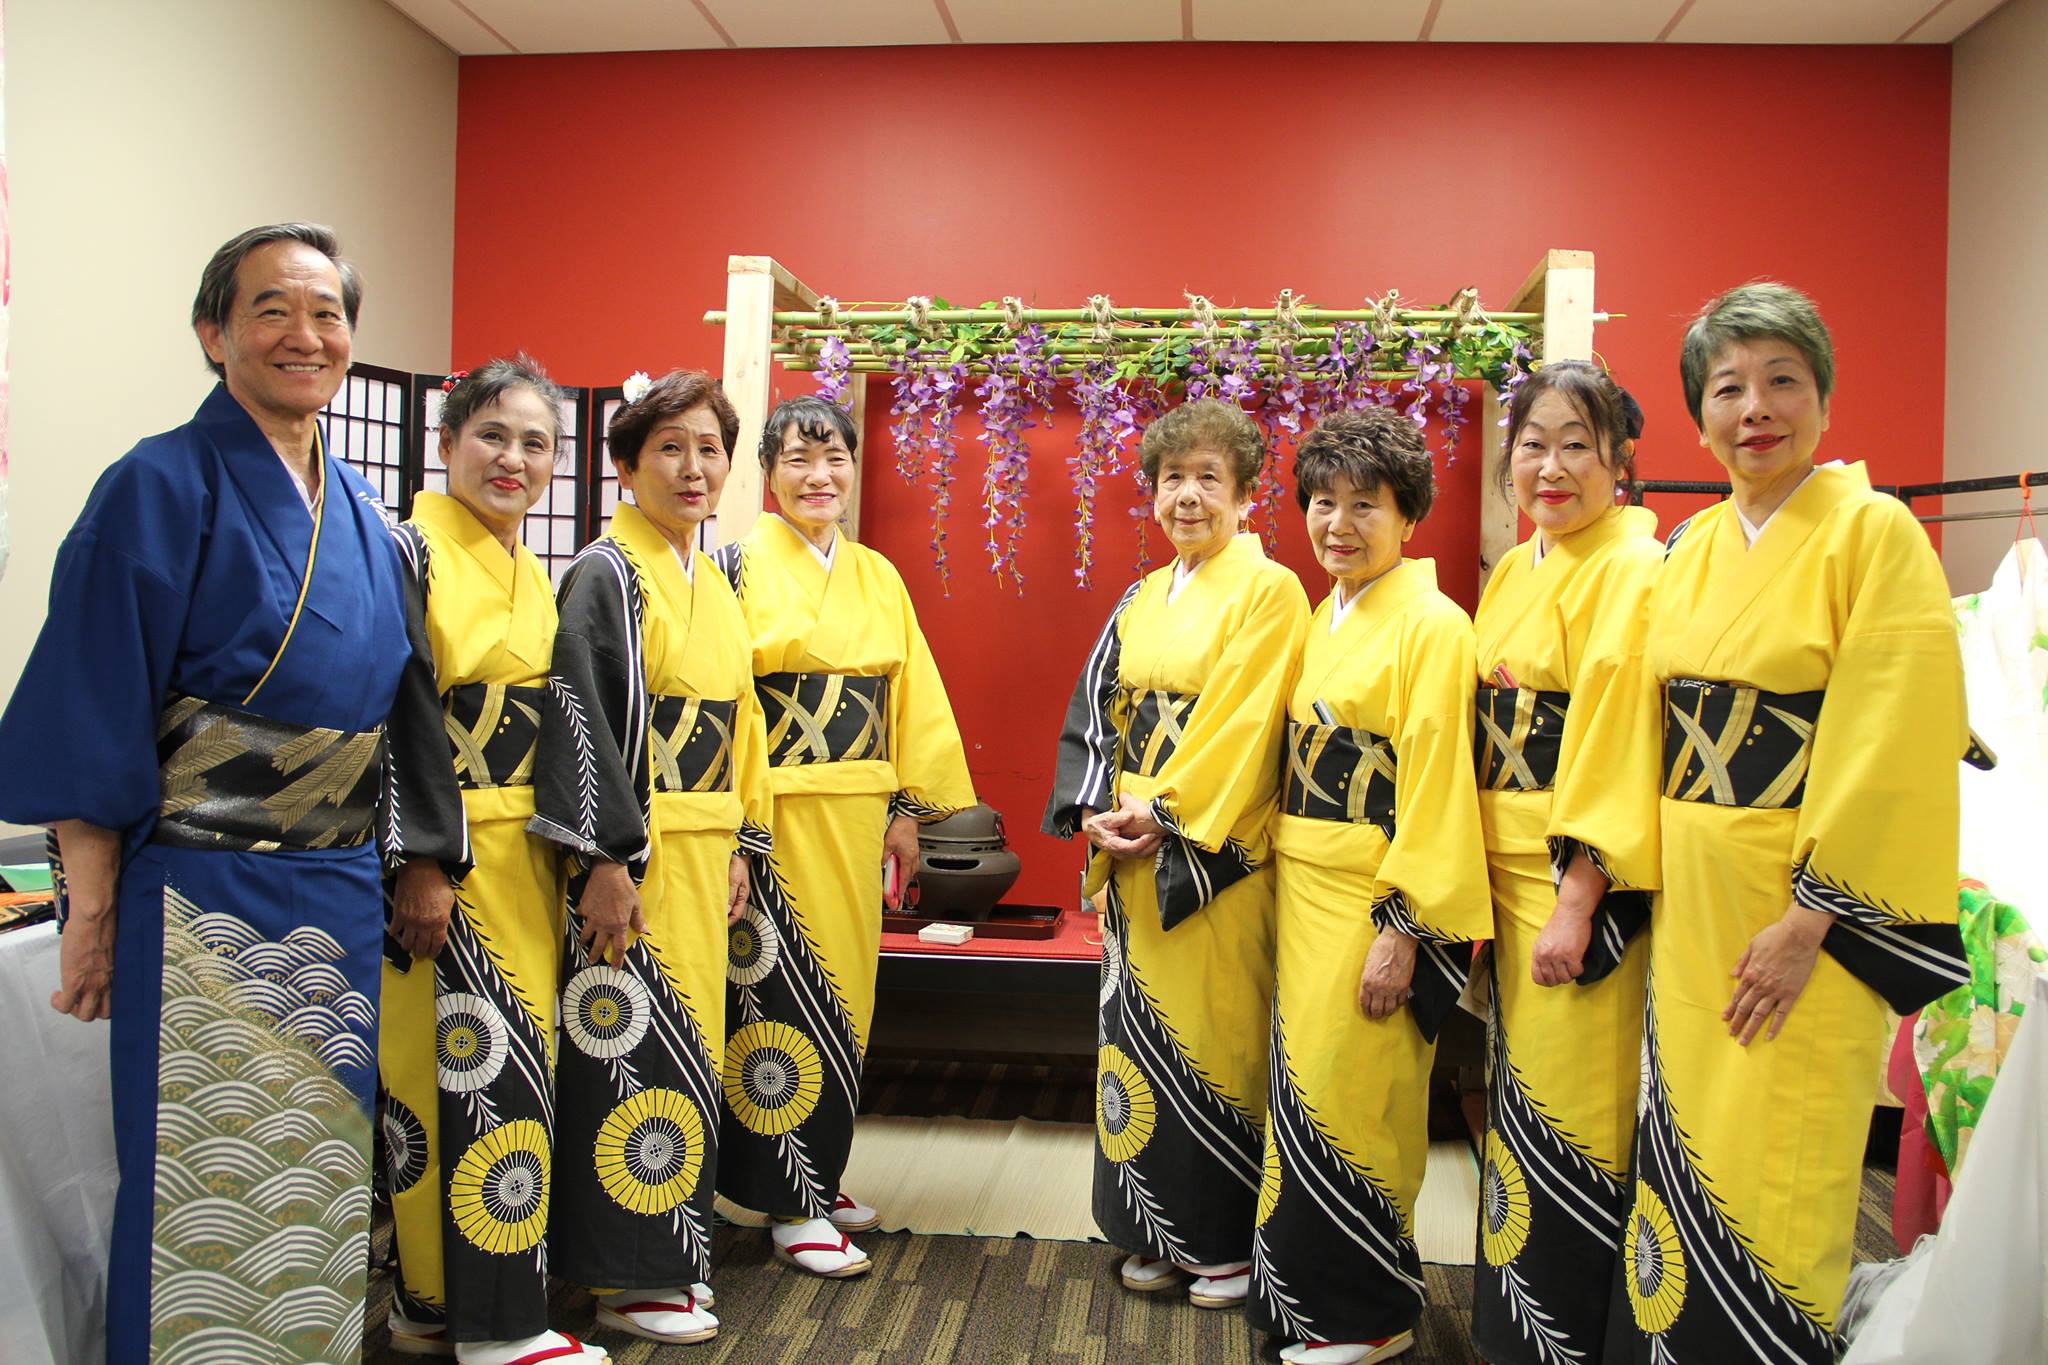 A group of people dressed in traditional Japanese outfits